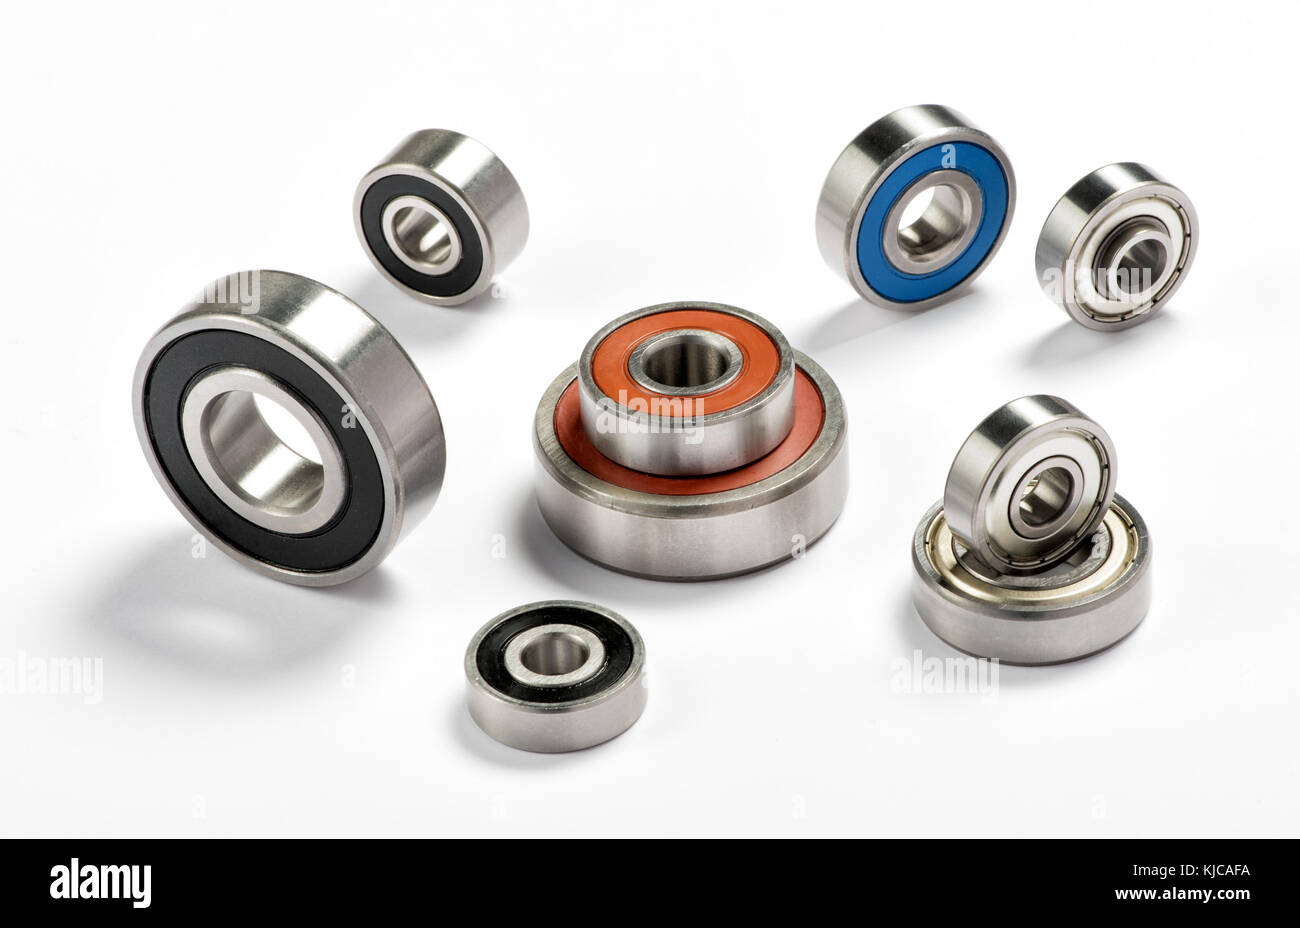 Set of metal bearings, close-up studio shot from high angle on white background Stock Photo